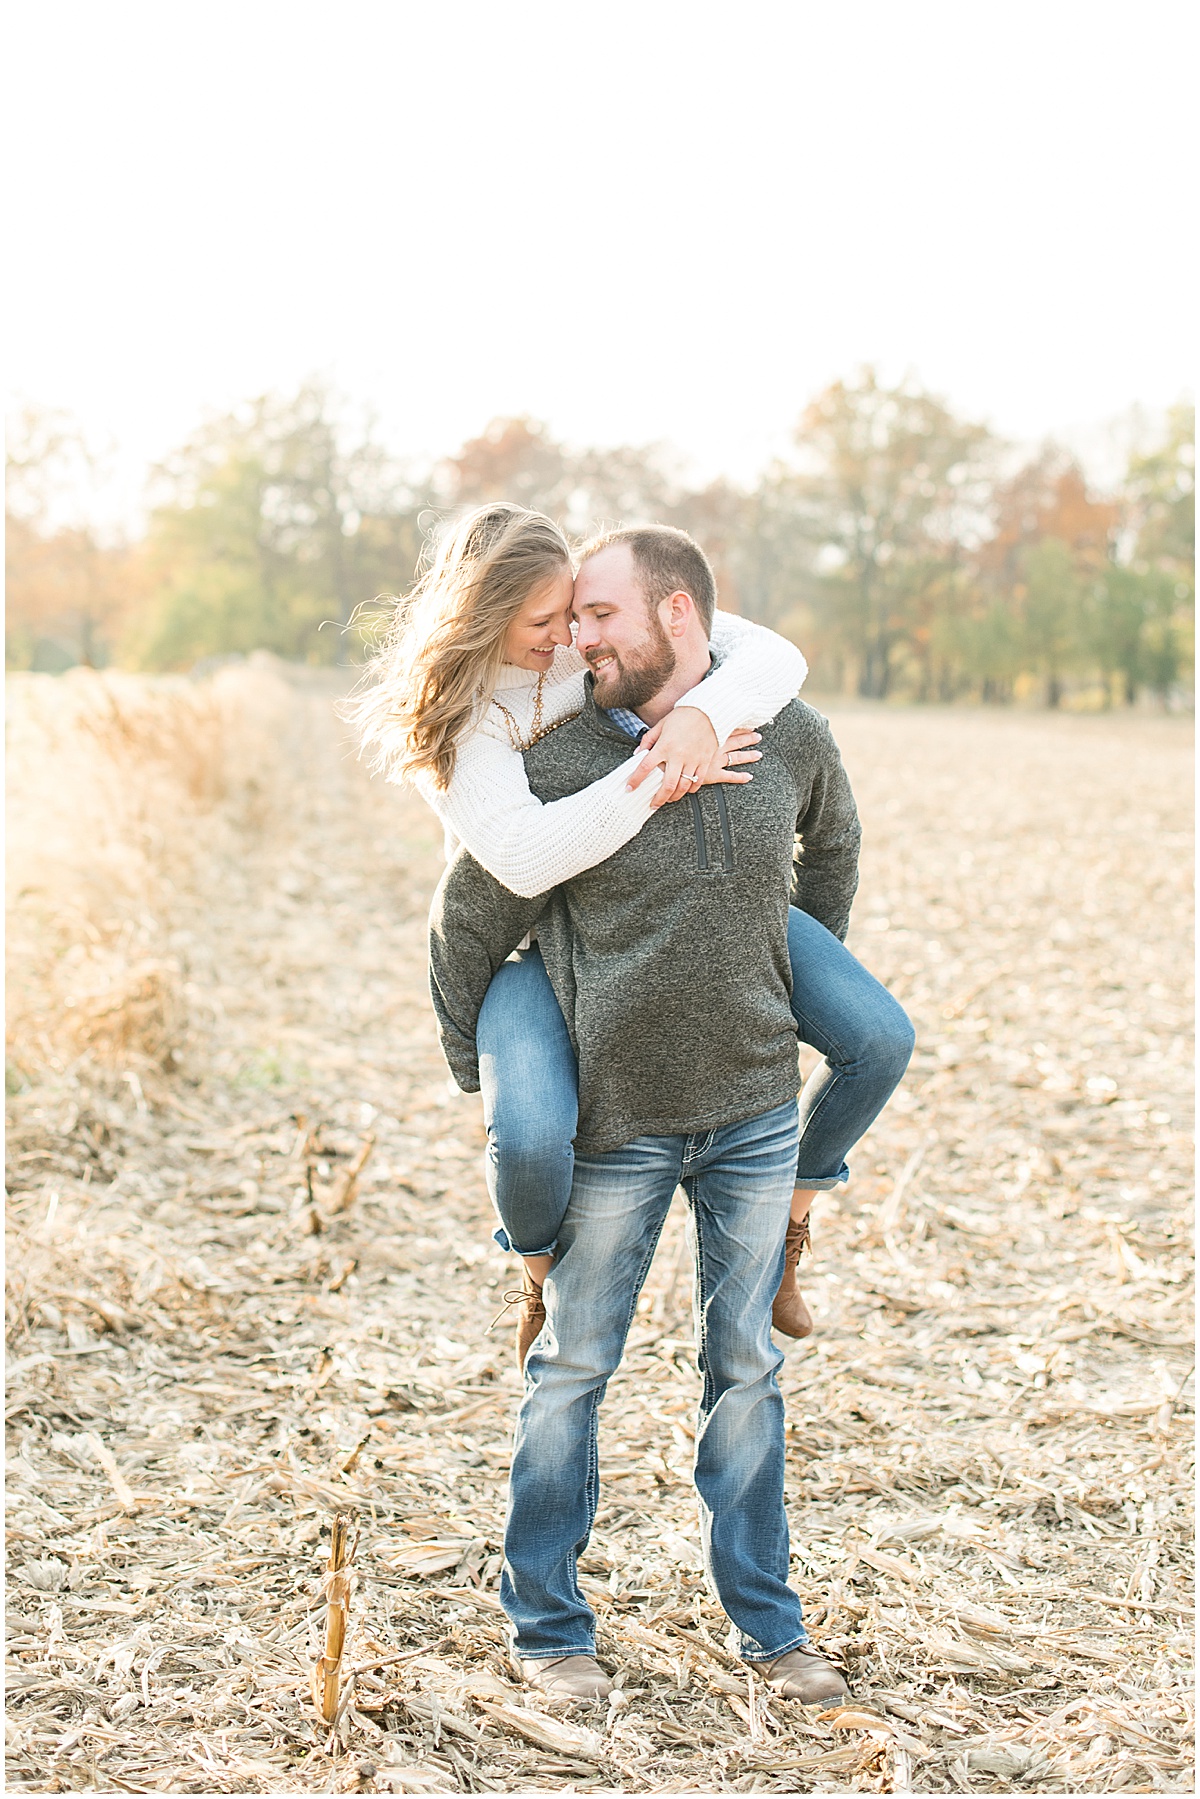 Fall engagement photos in Monticello, Indiana